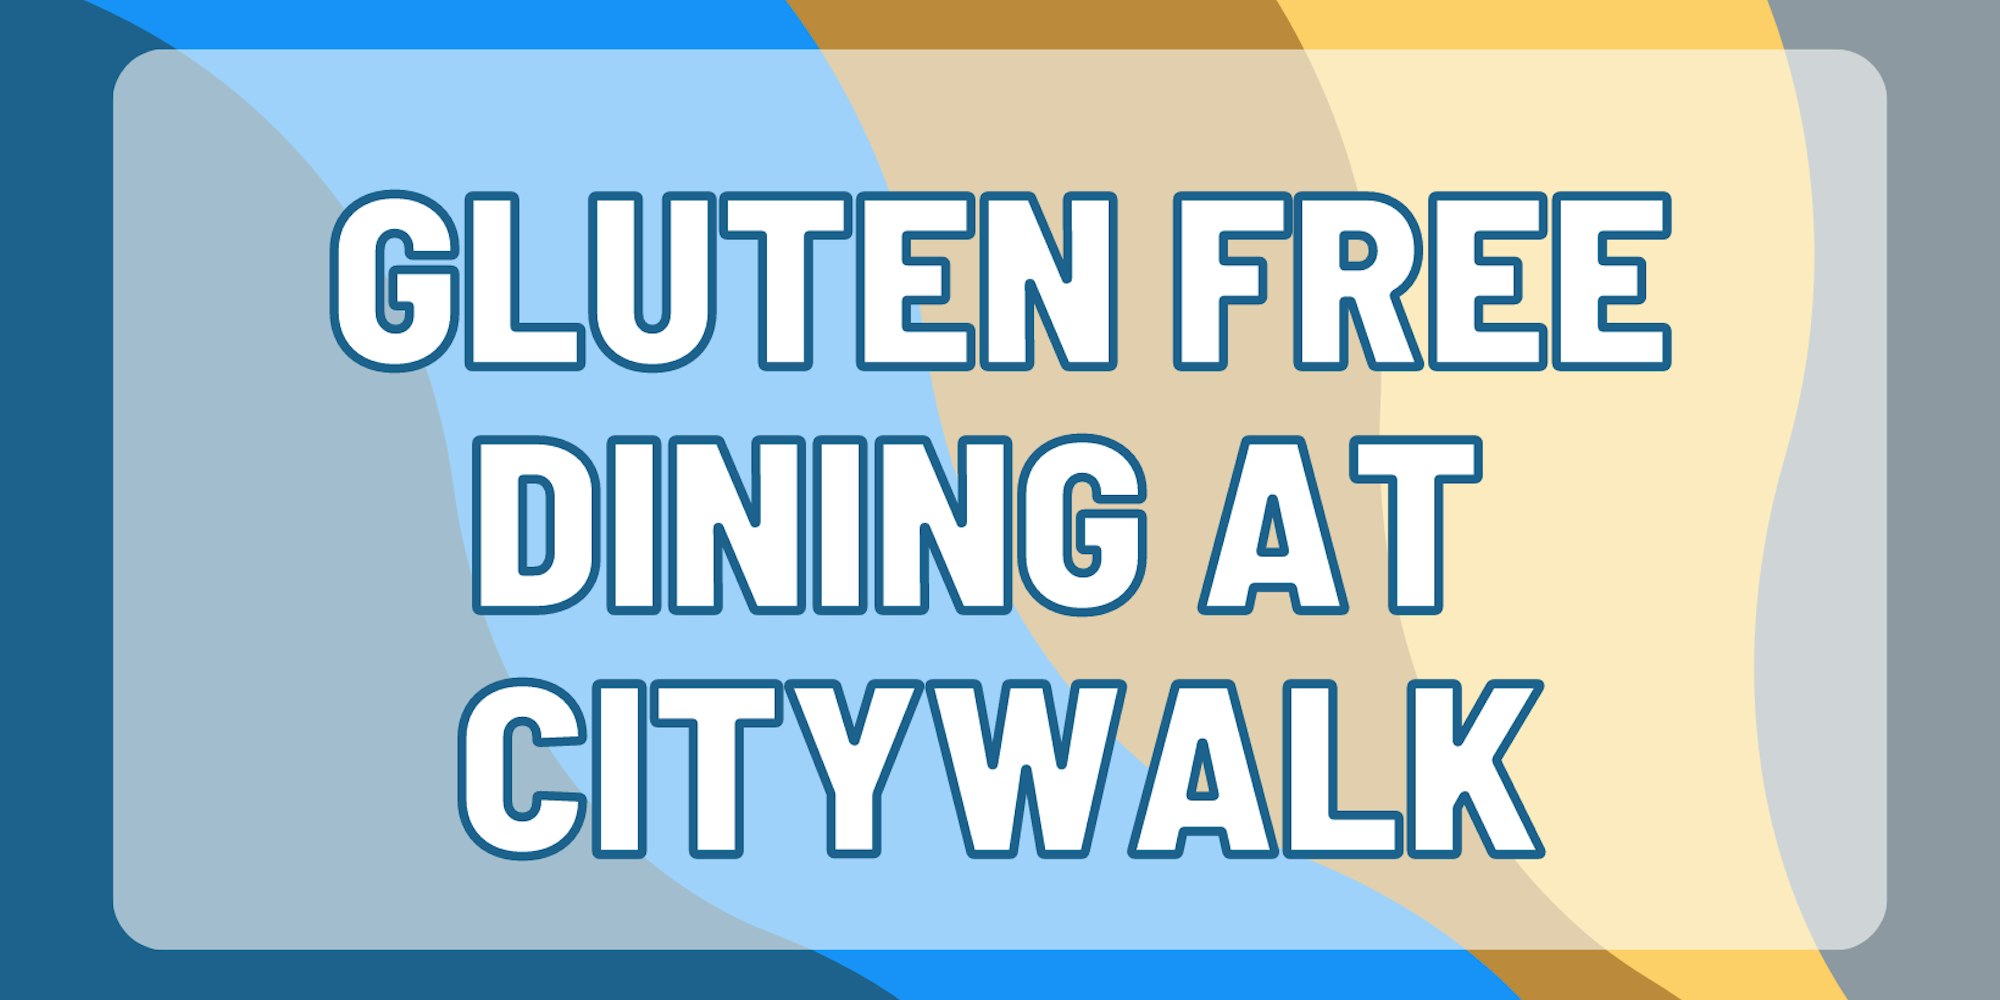 Cover Image for Guide to Gluten Free Dining at Citywalk